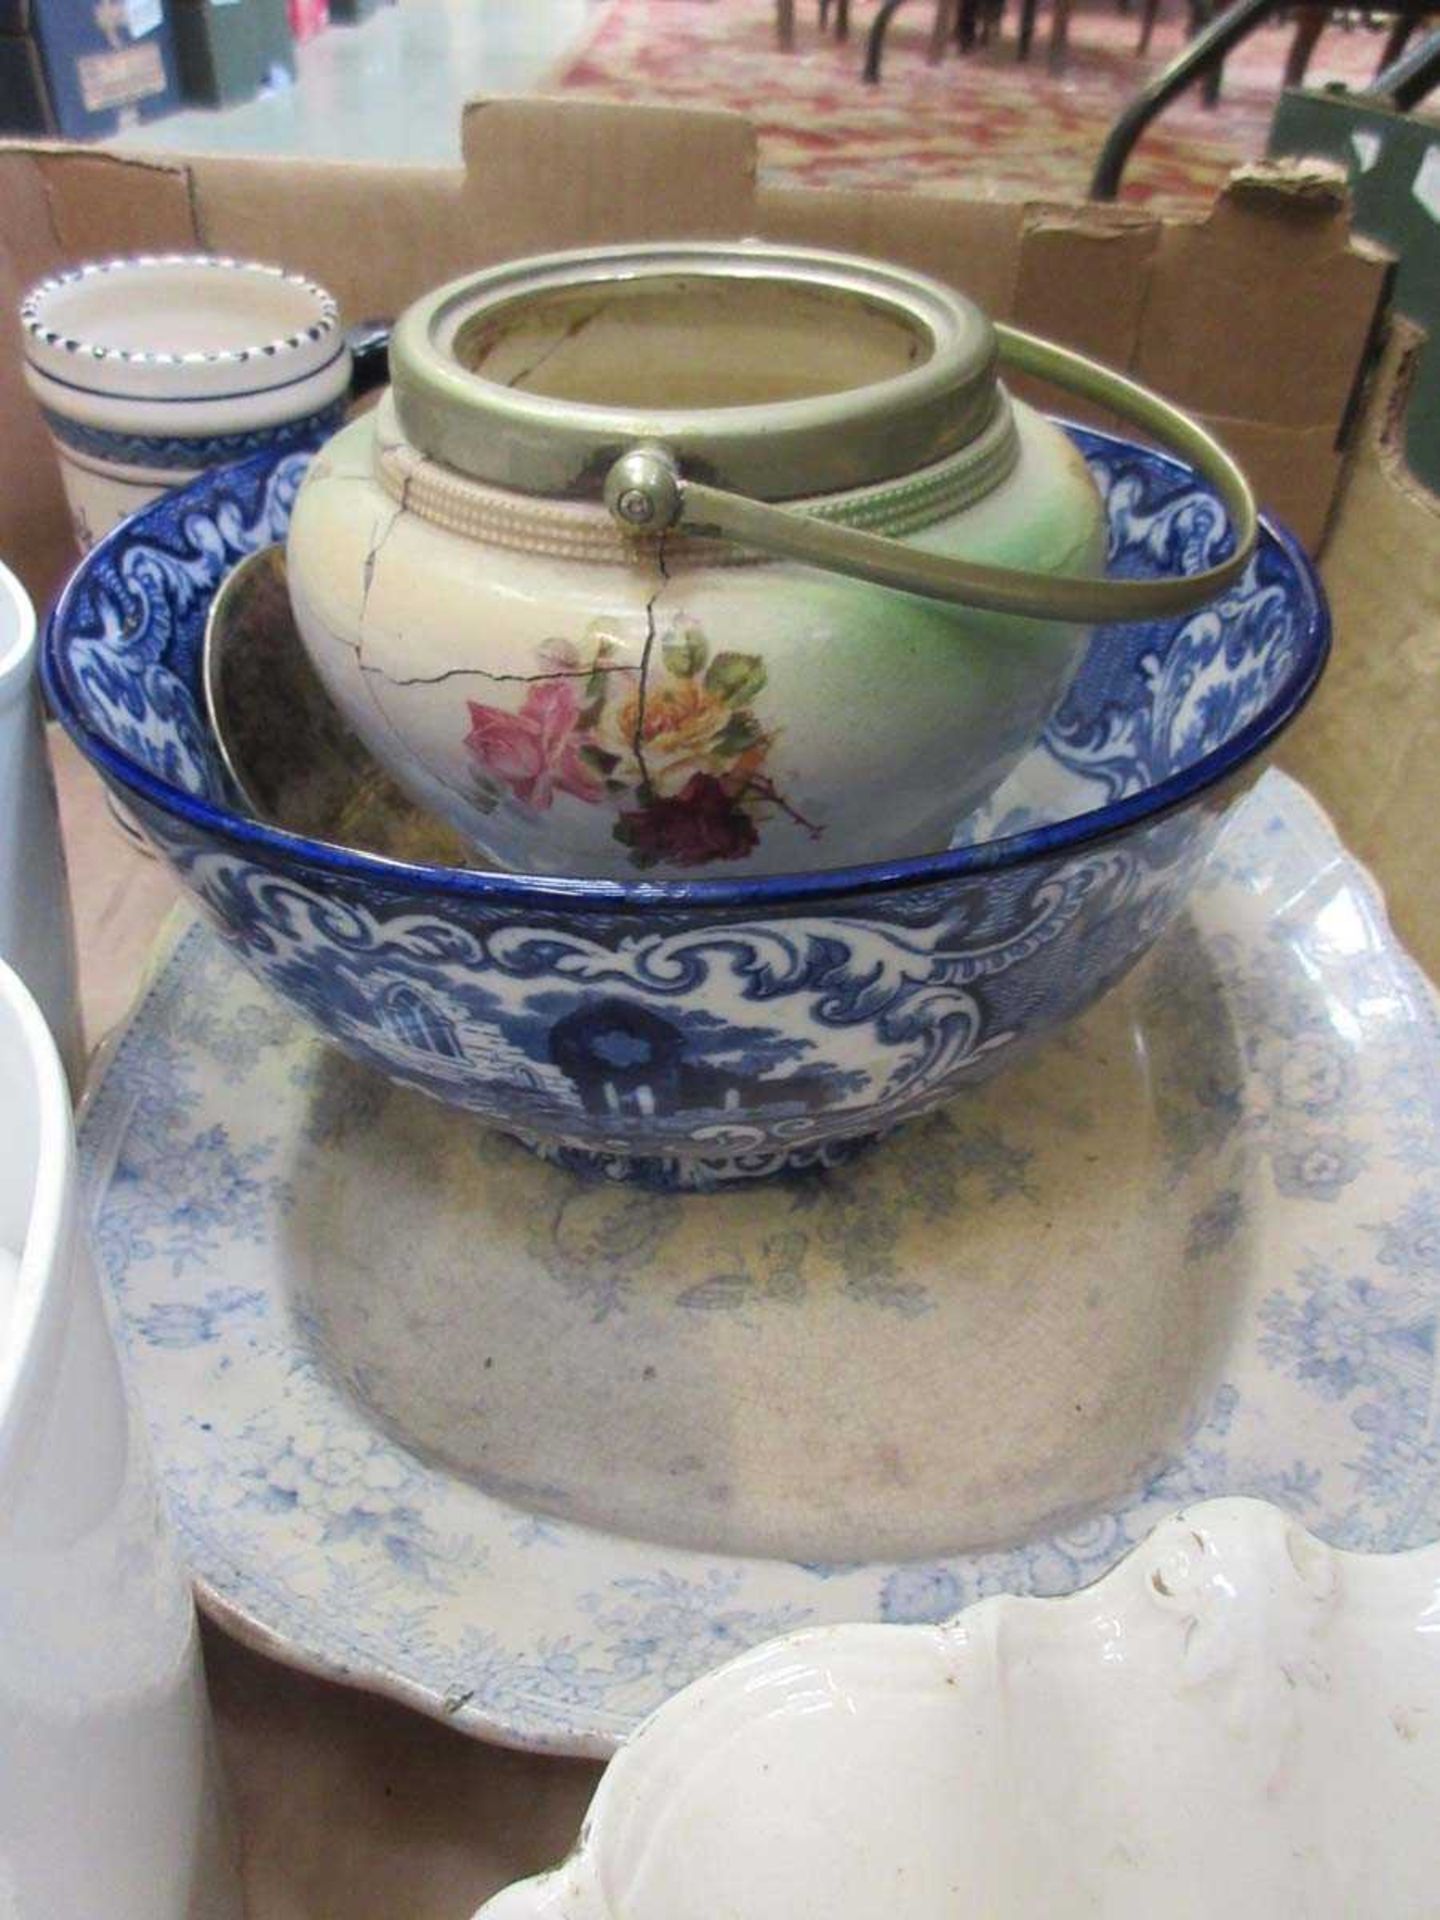 A tray of ceramic ware to include mugs, bowls, plates, etc - Image 3 of 3